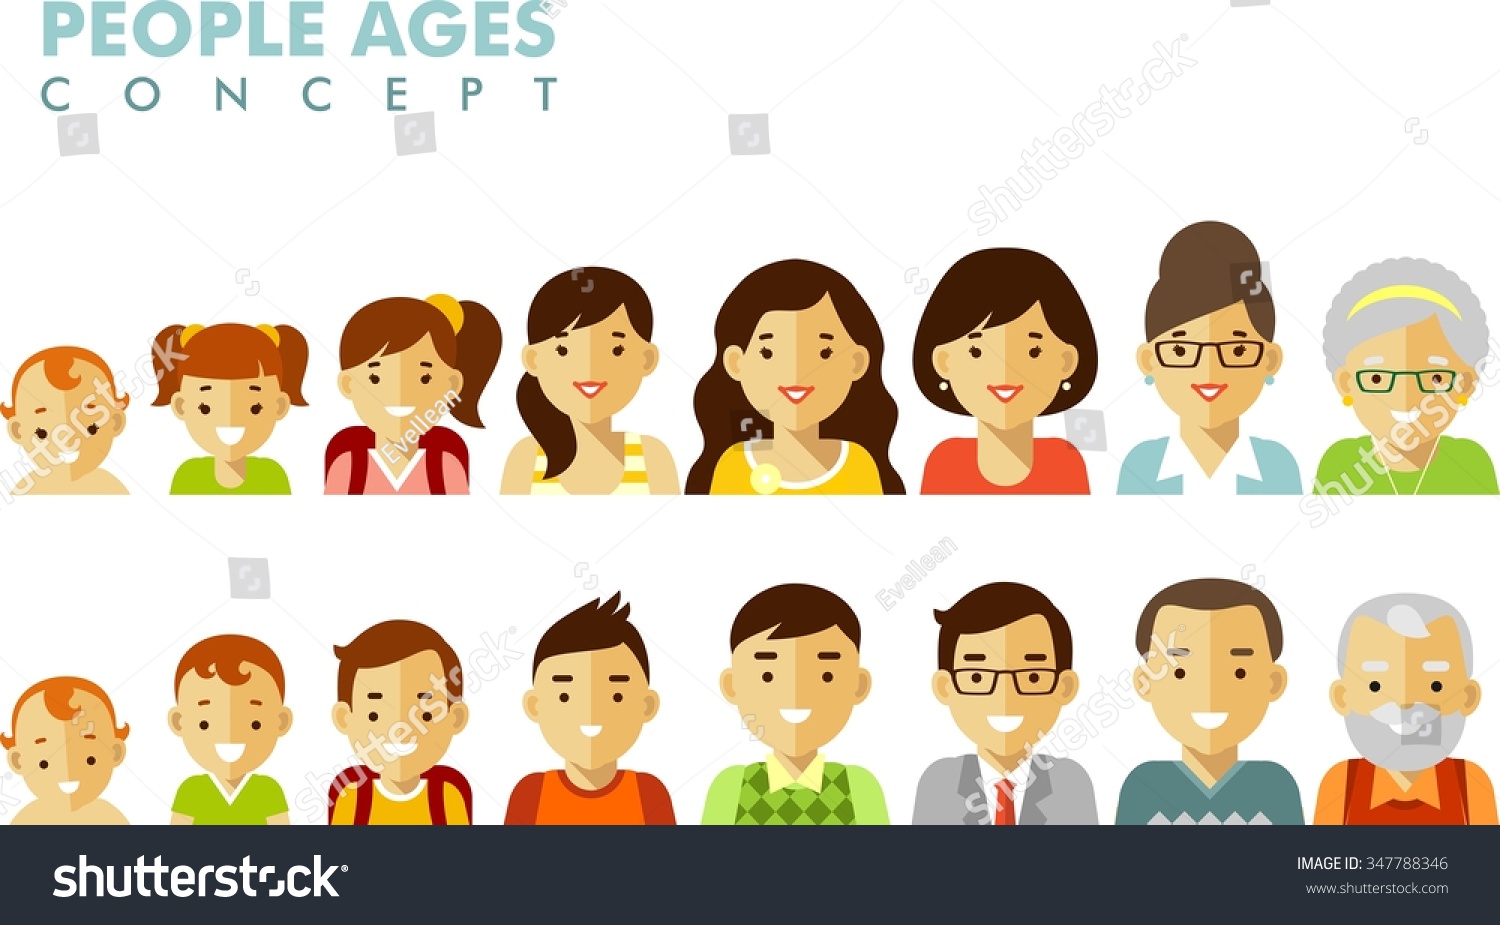 Older Teens And Adults Also 44